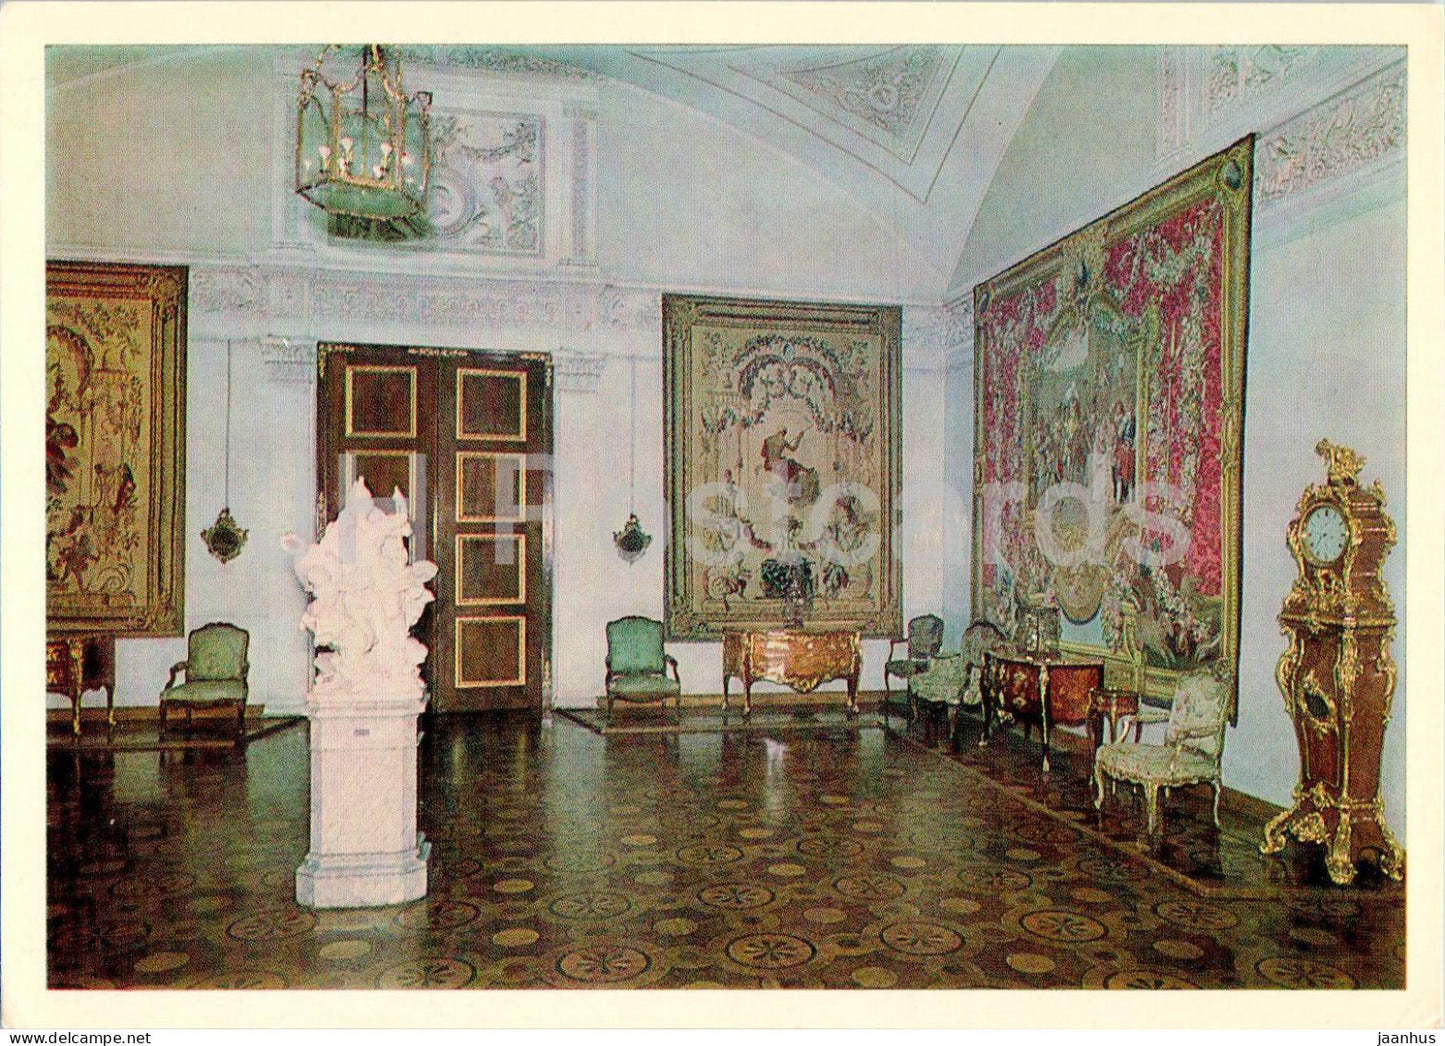 Leningrad - St Petersburg - Hermitage - Room of French applied art in the Winter Palace - 1984 - Russia USSR - unused - JH Postcards